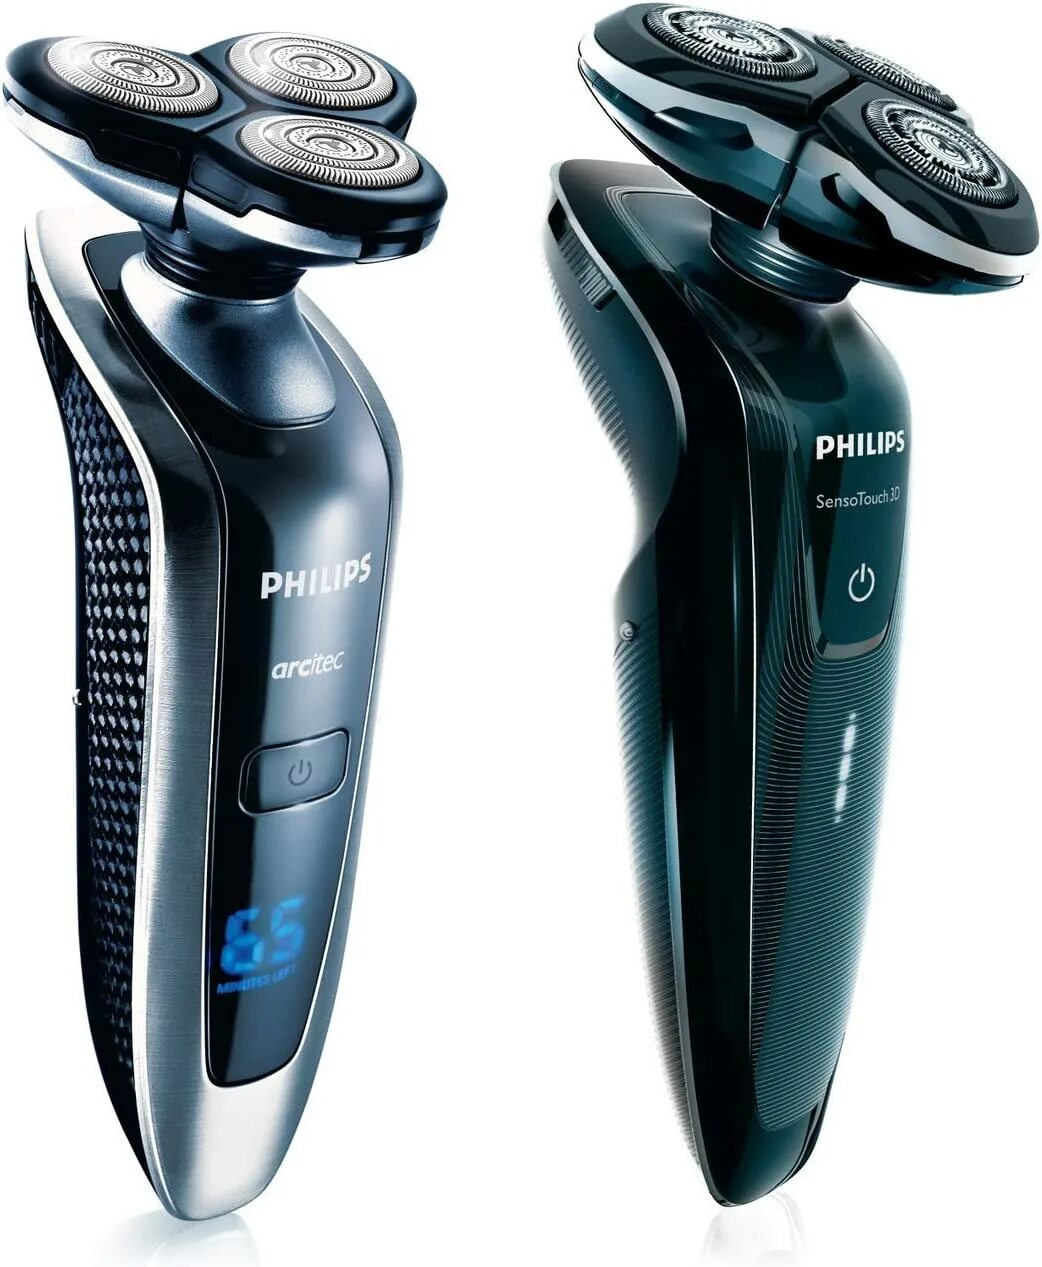 Philips SENSOTOUCH 3d. Philips rq1290 Series 9000. Бритвенный блок rq12. Бритвенный блок Philips rq12. Аксессуары philips